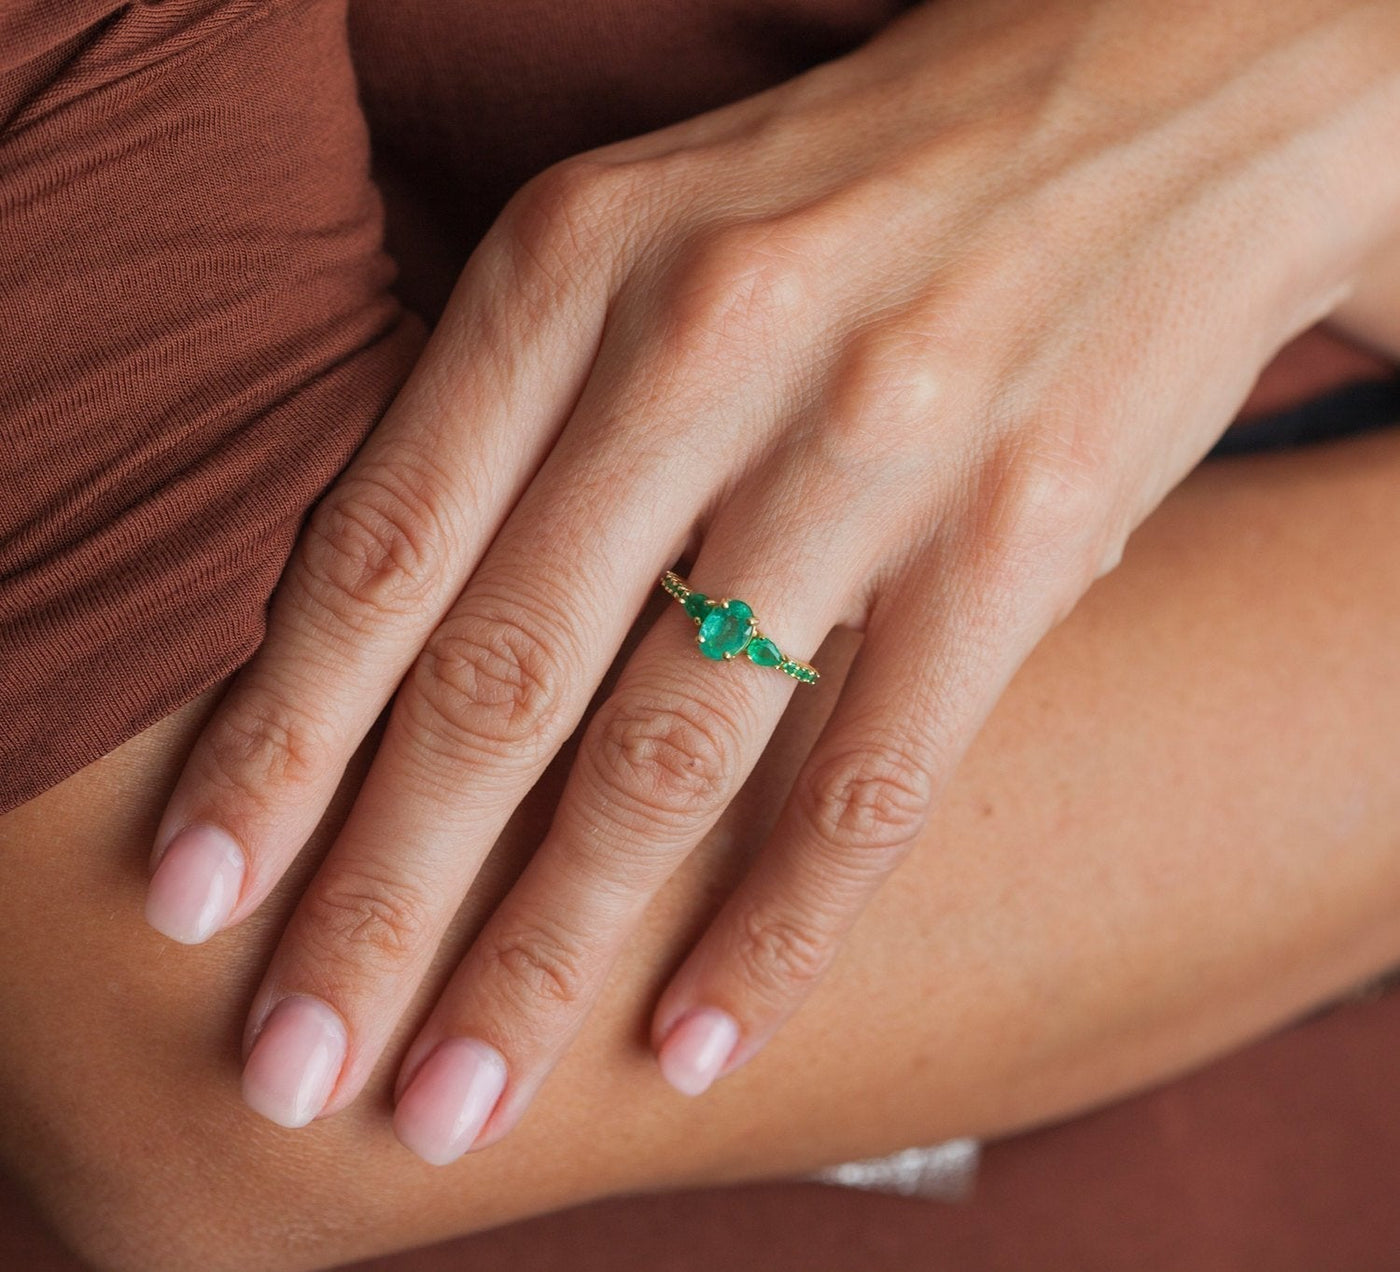 Oval Emerald Cluster Ring with 2 Horizontal Placed Pear Emeralds and Emeralds on the Band